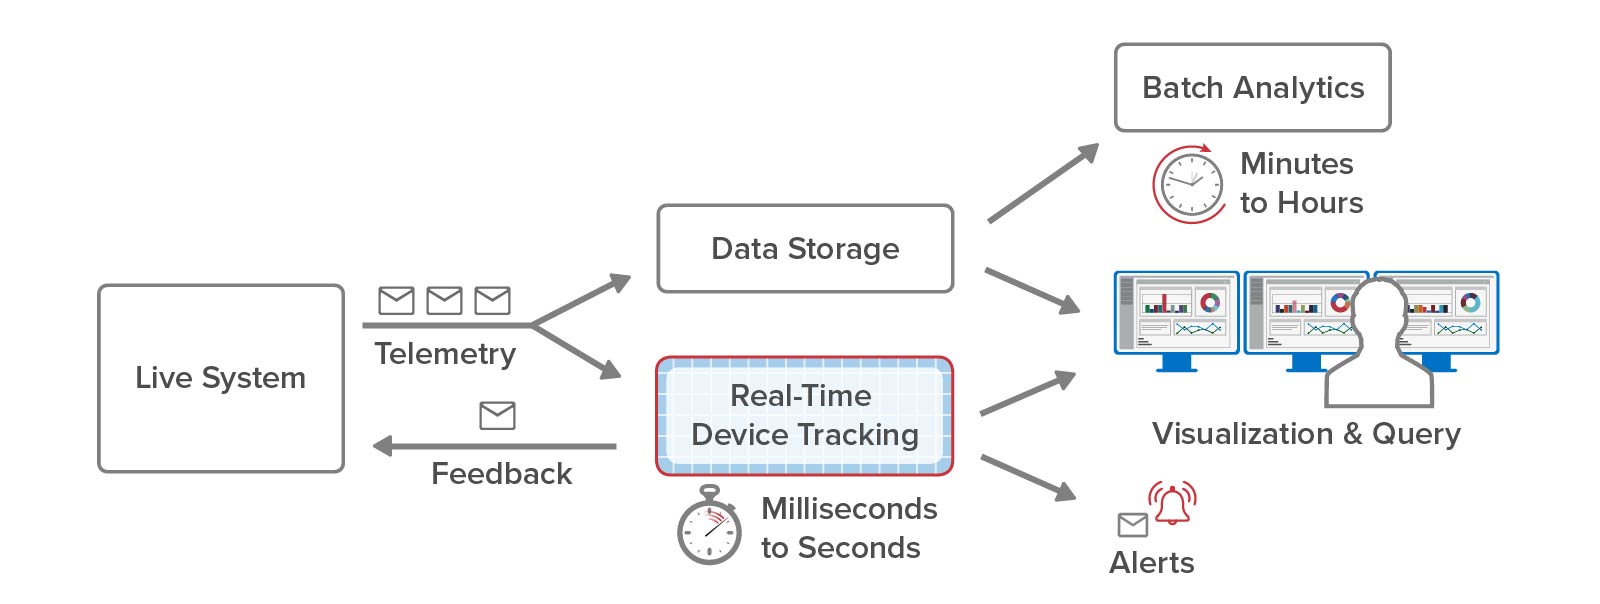 Real-time device tracking can be seamlessly added to conventional streaming analytics.